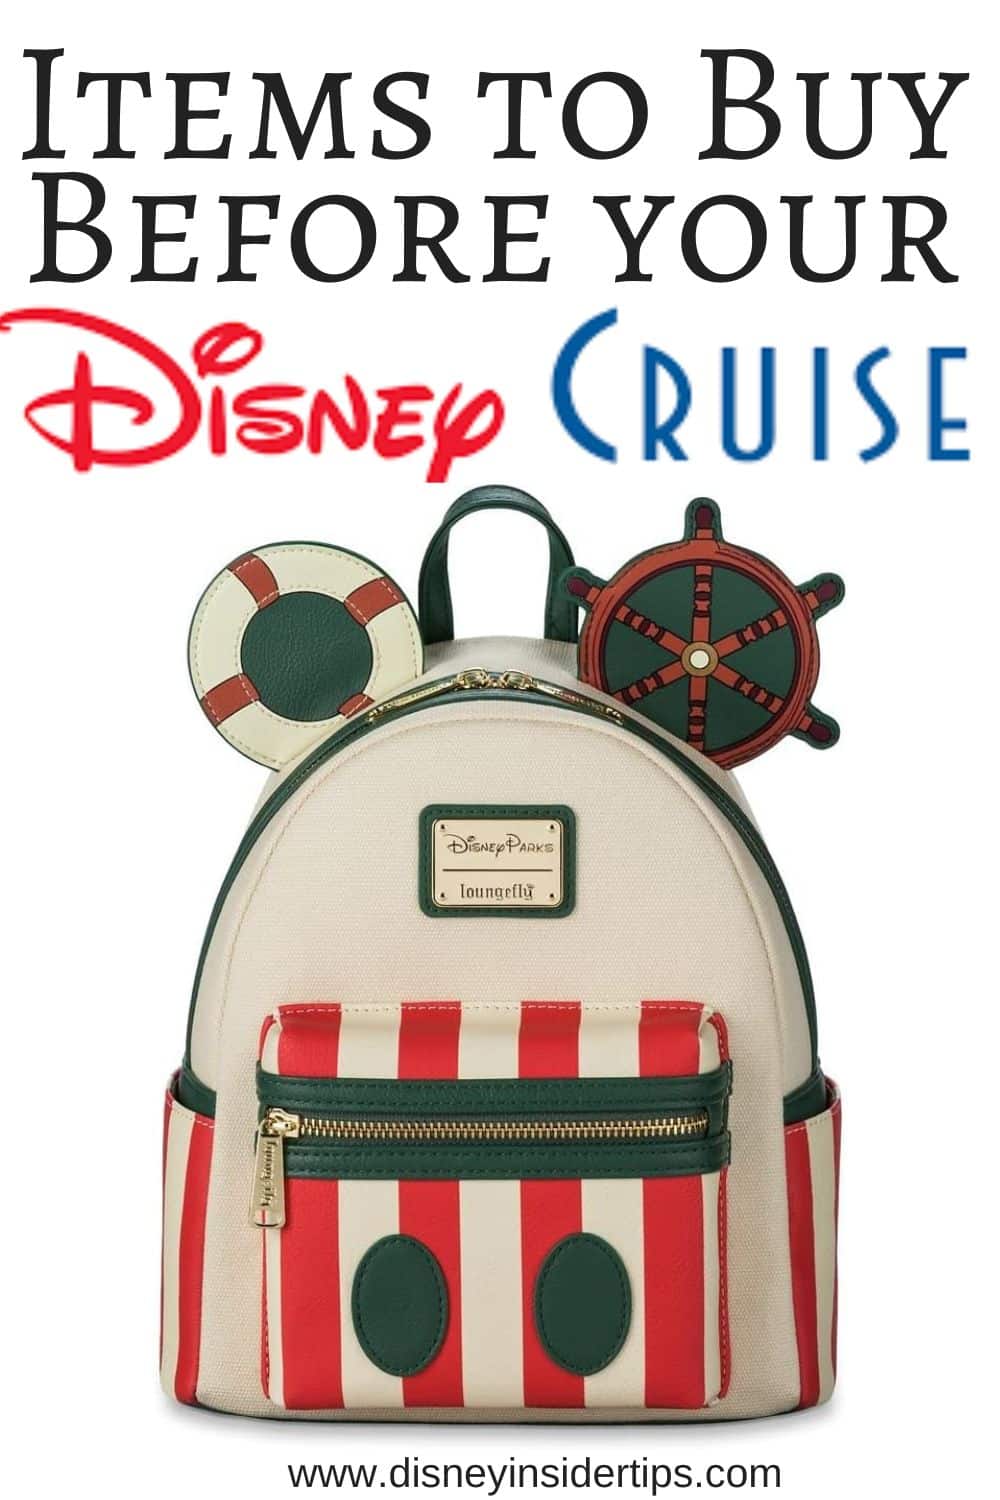 Things to Buy Before a Disney Cruise